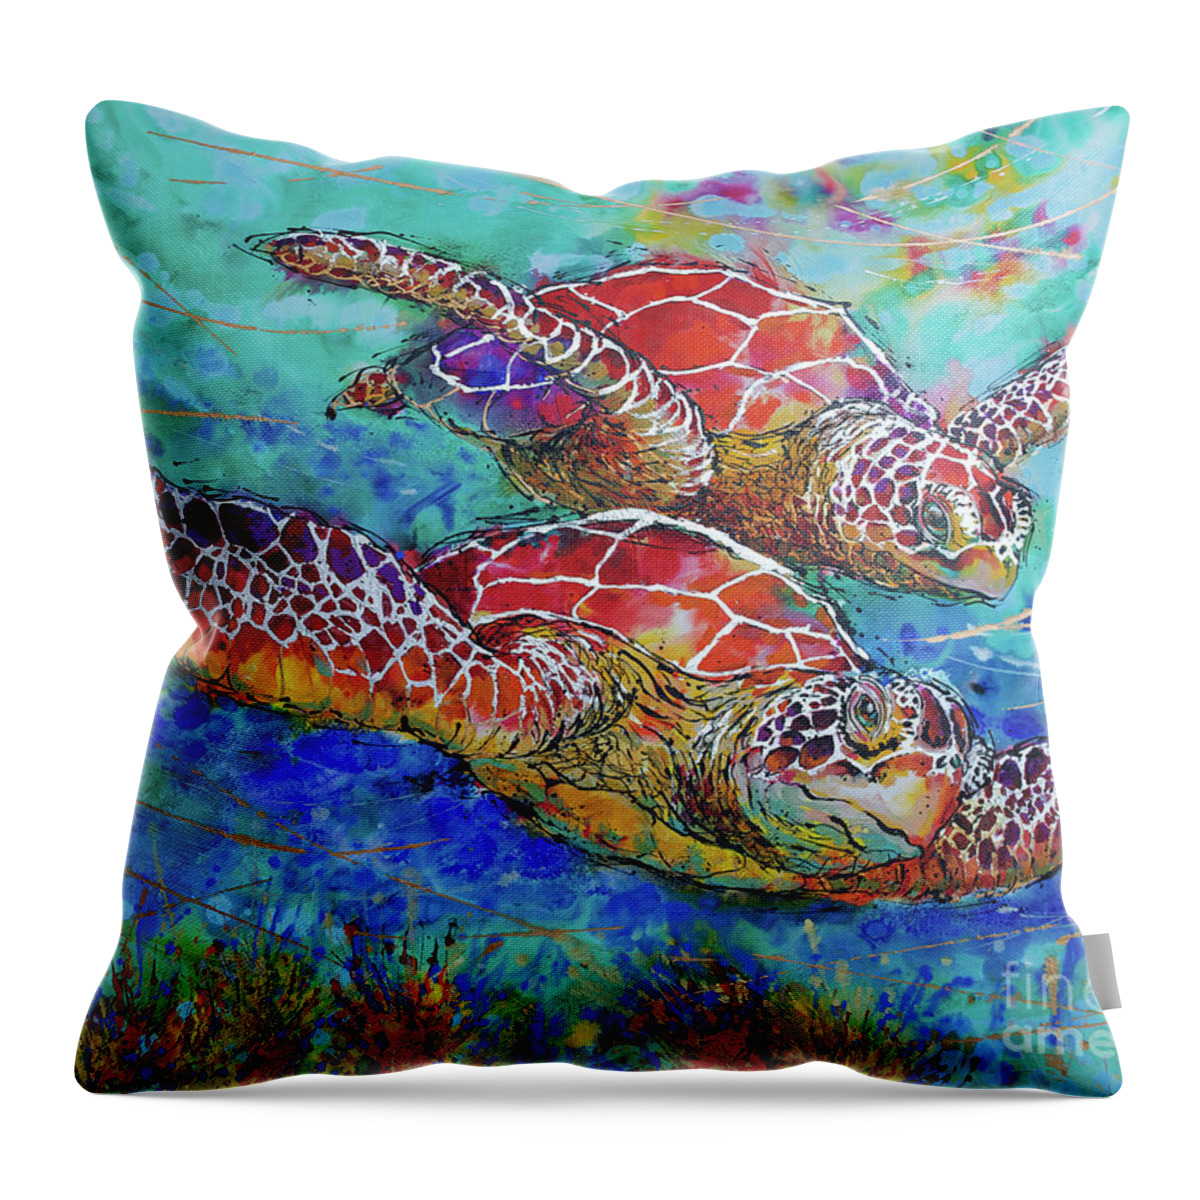  Throw Pillow featuring the painting Sea Turtle Buddies II by Jyotika Shroff